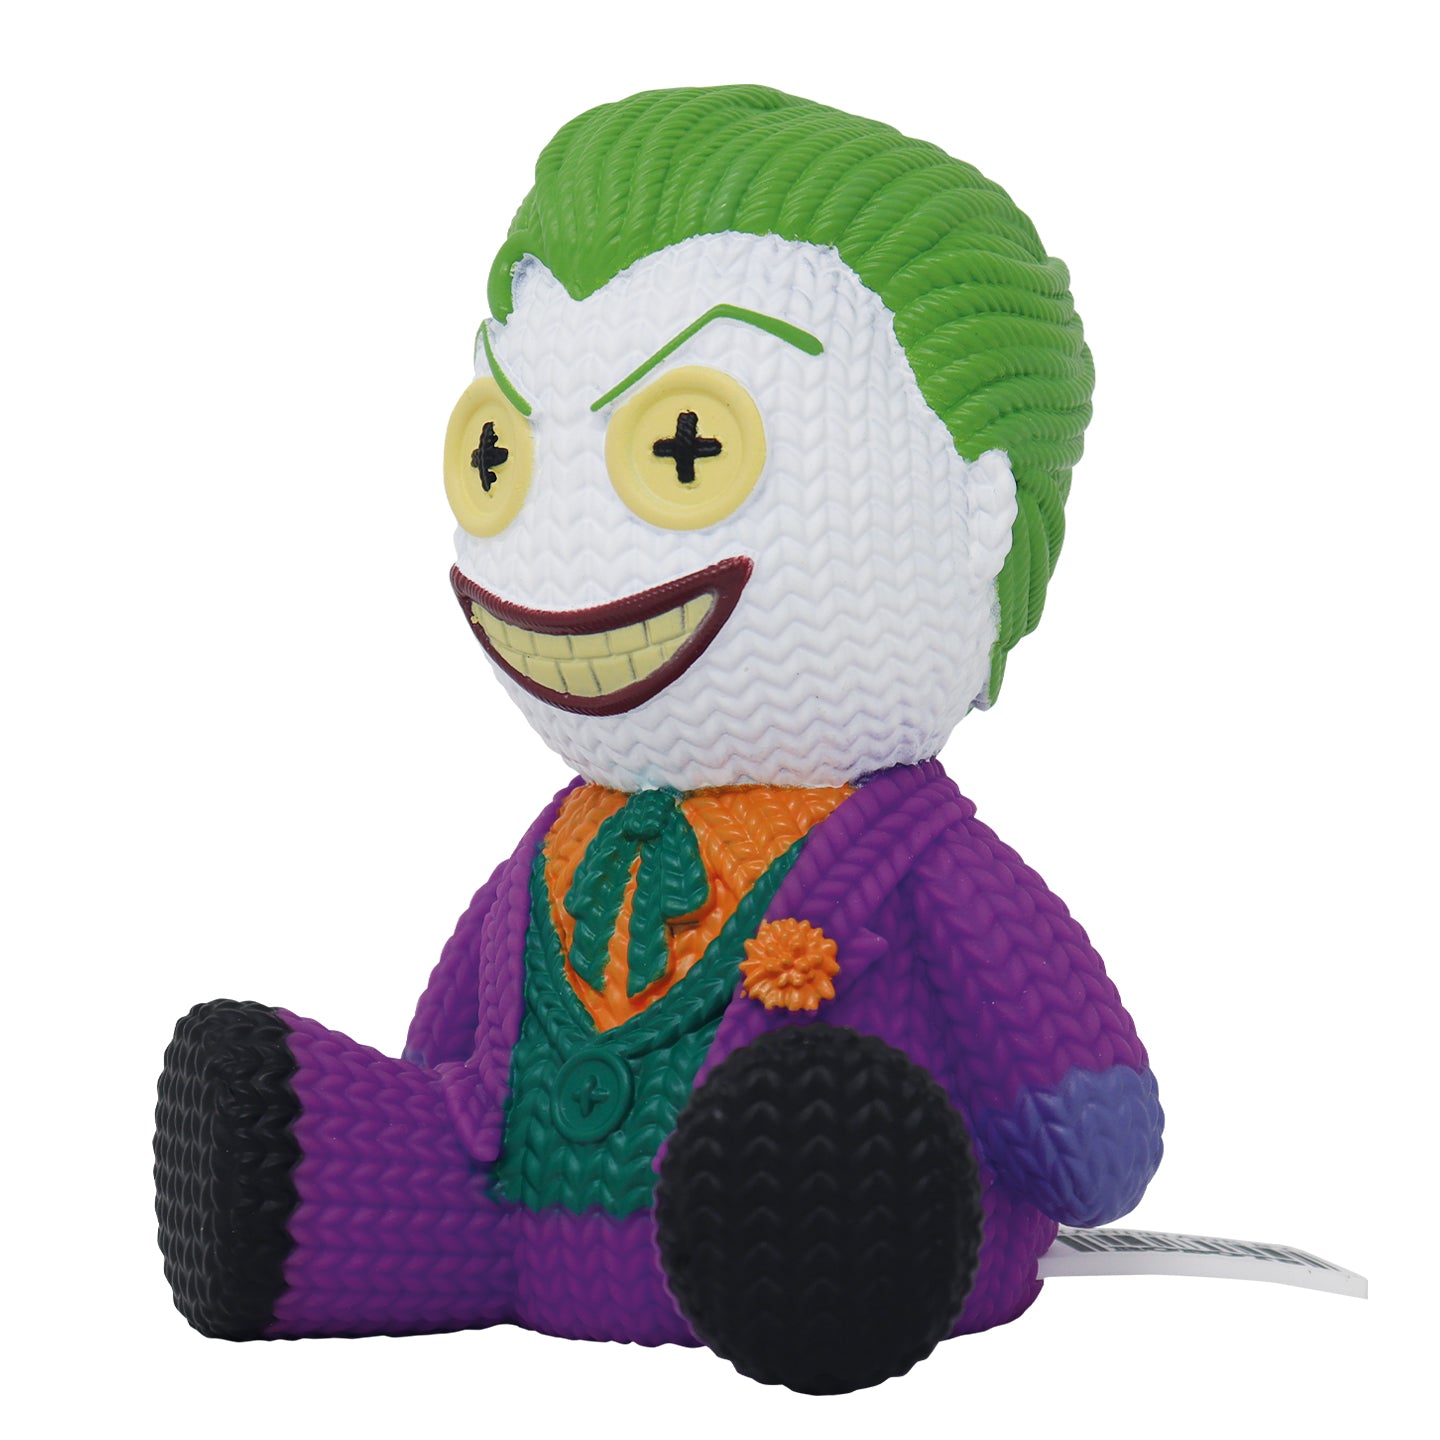 DC - The Joker Collectible Vinyl Figure from Handmade By Robots